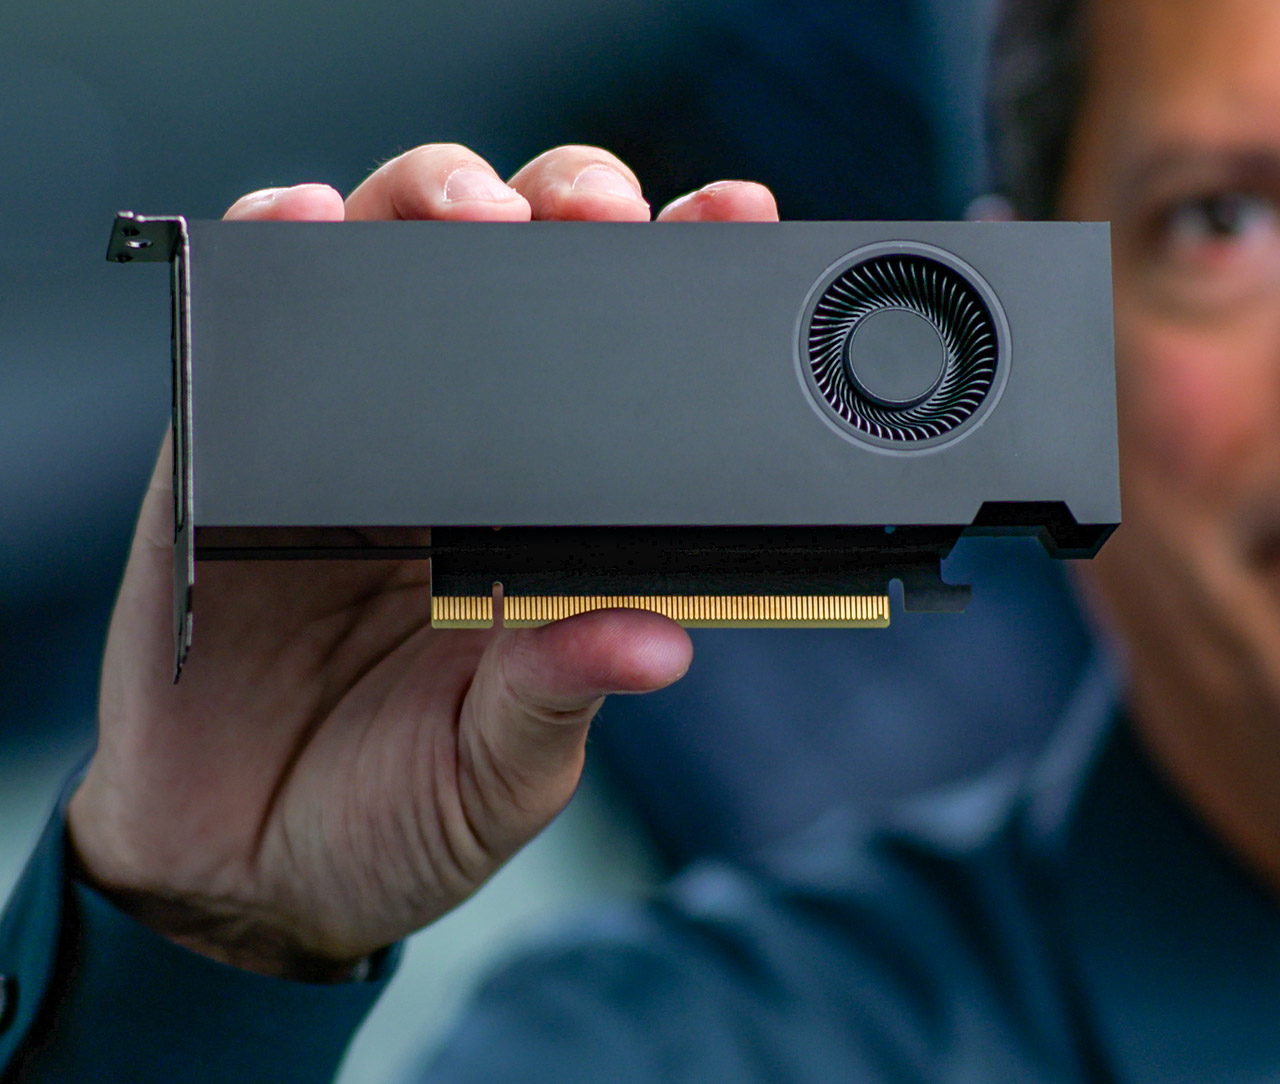 NVIDIA RTX A2000 Graphics Card is Most Compact Yet, Perfect for 